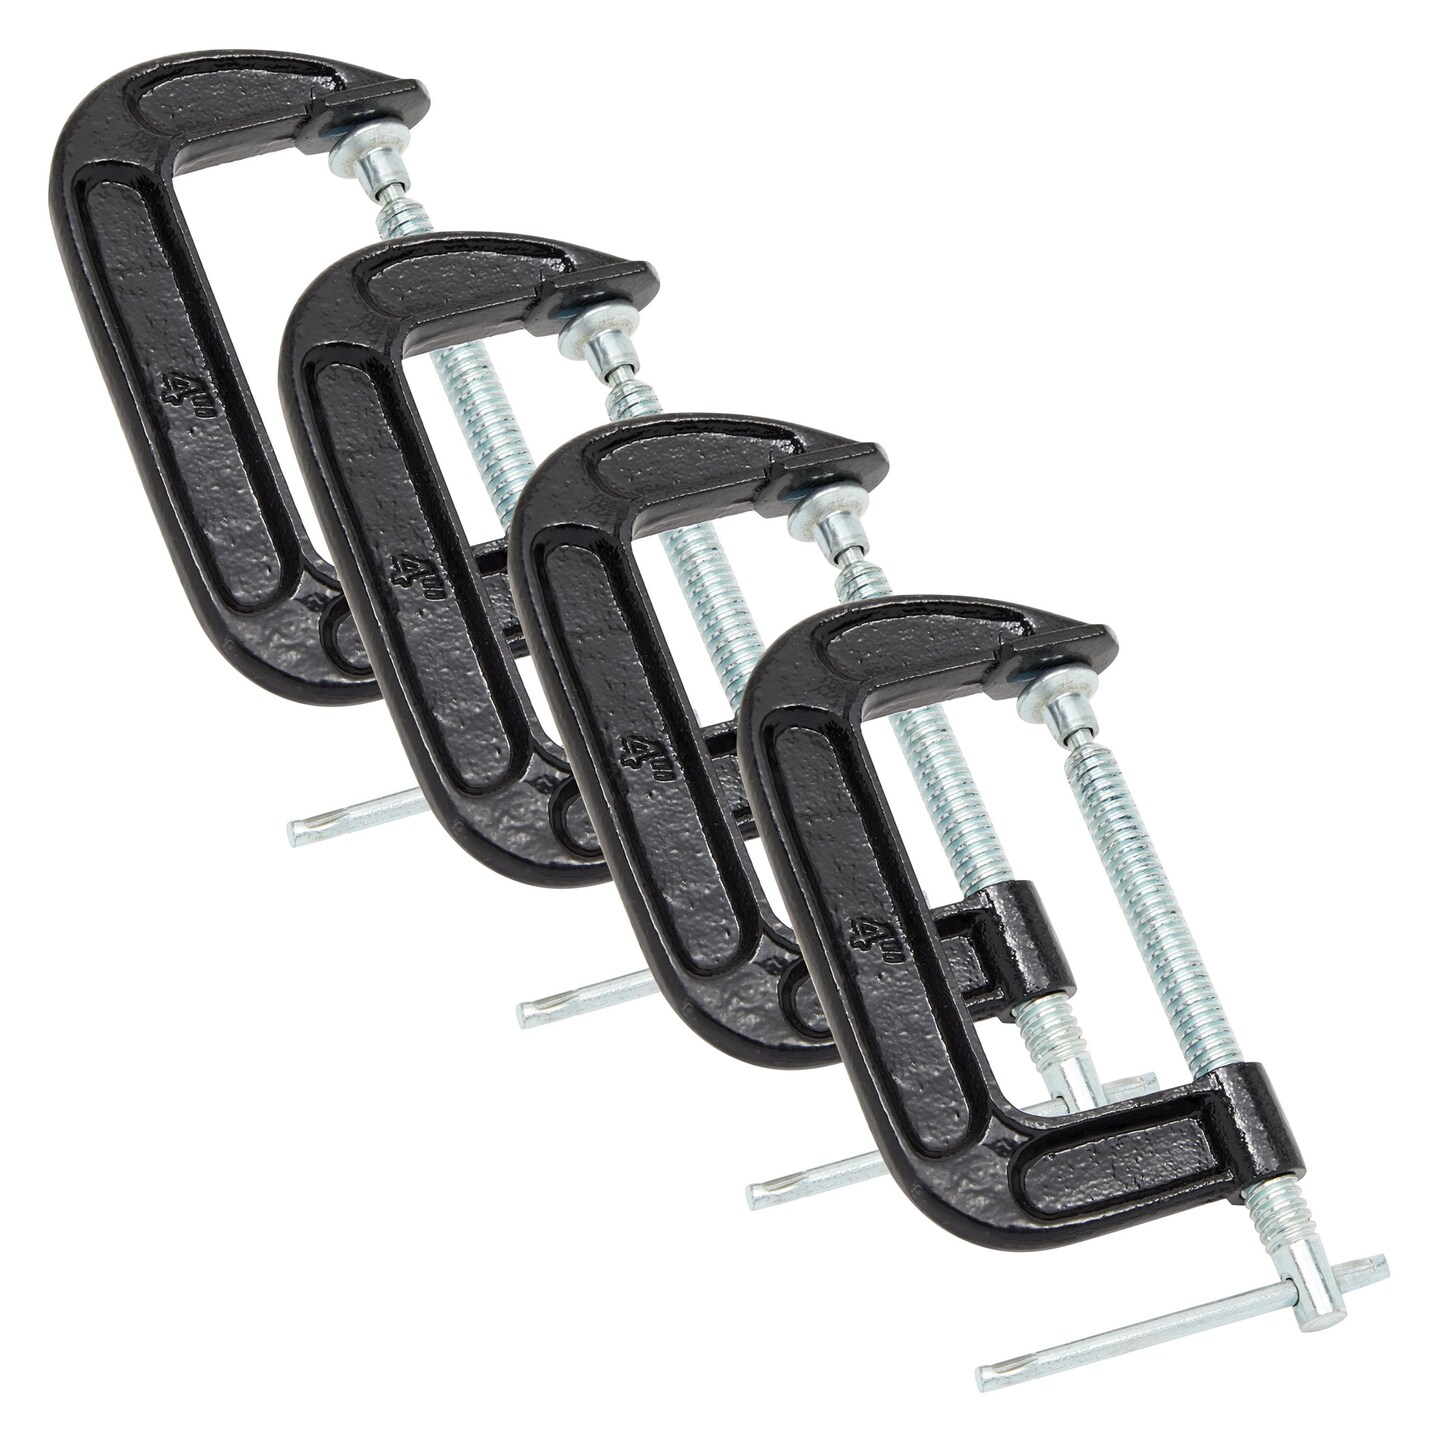 4 Pack Heavy Duty C Clamps with 4 Inch Jaw Opening for Woodworking, Welding, Automotive, Carpentry Building